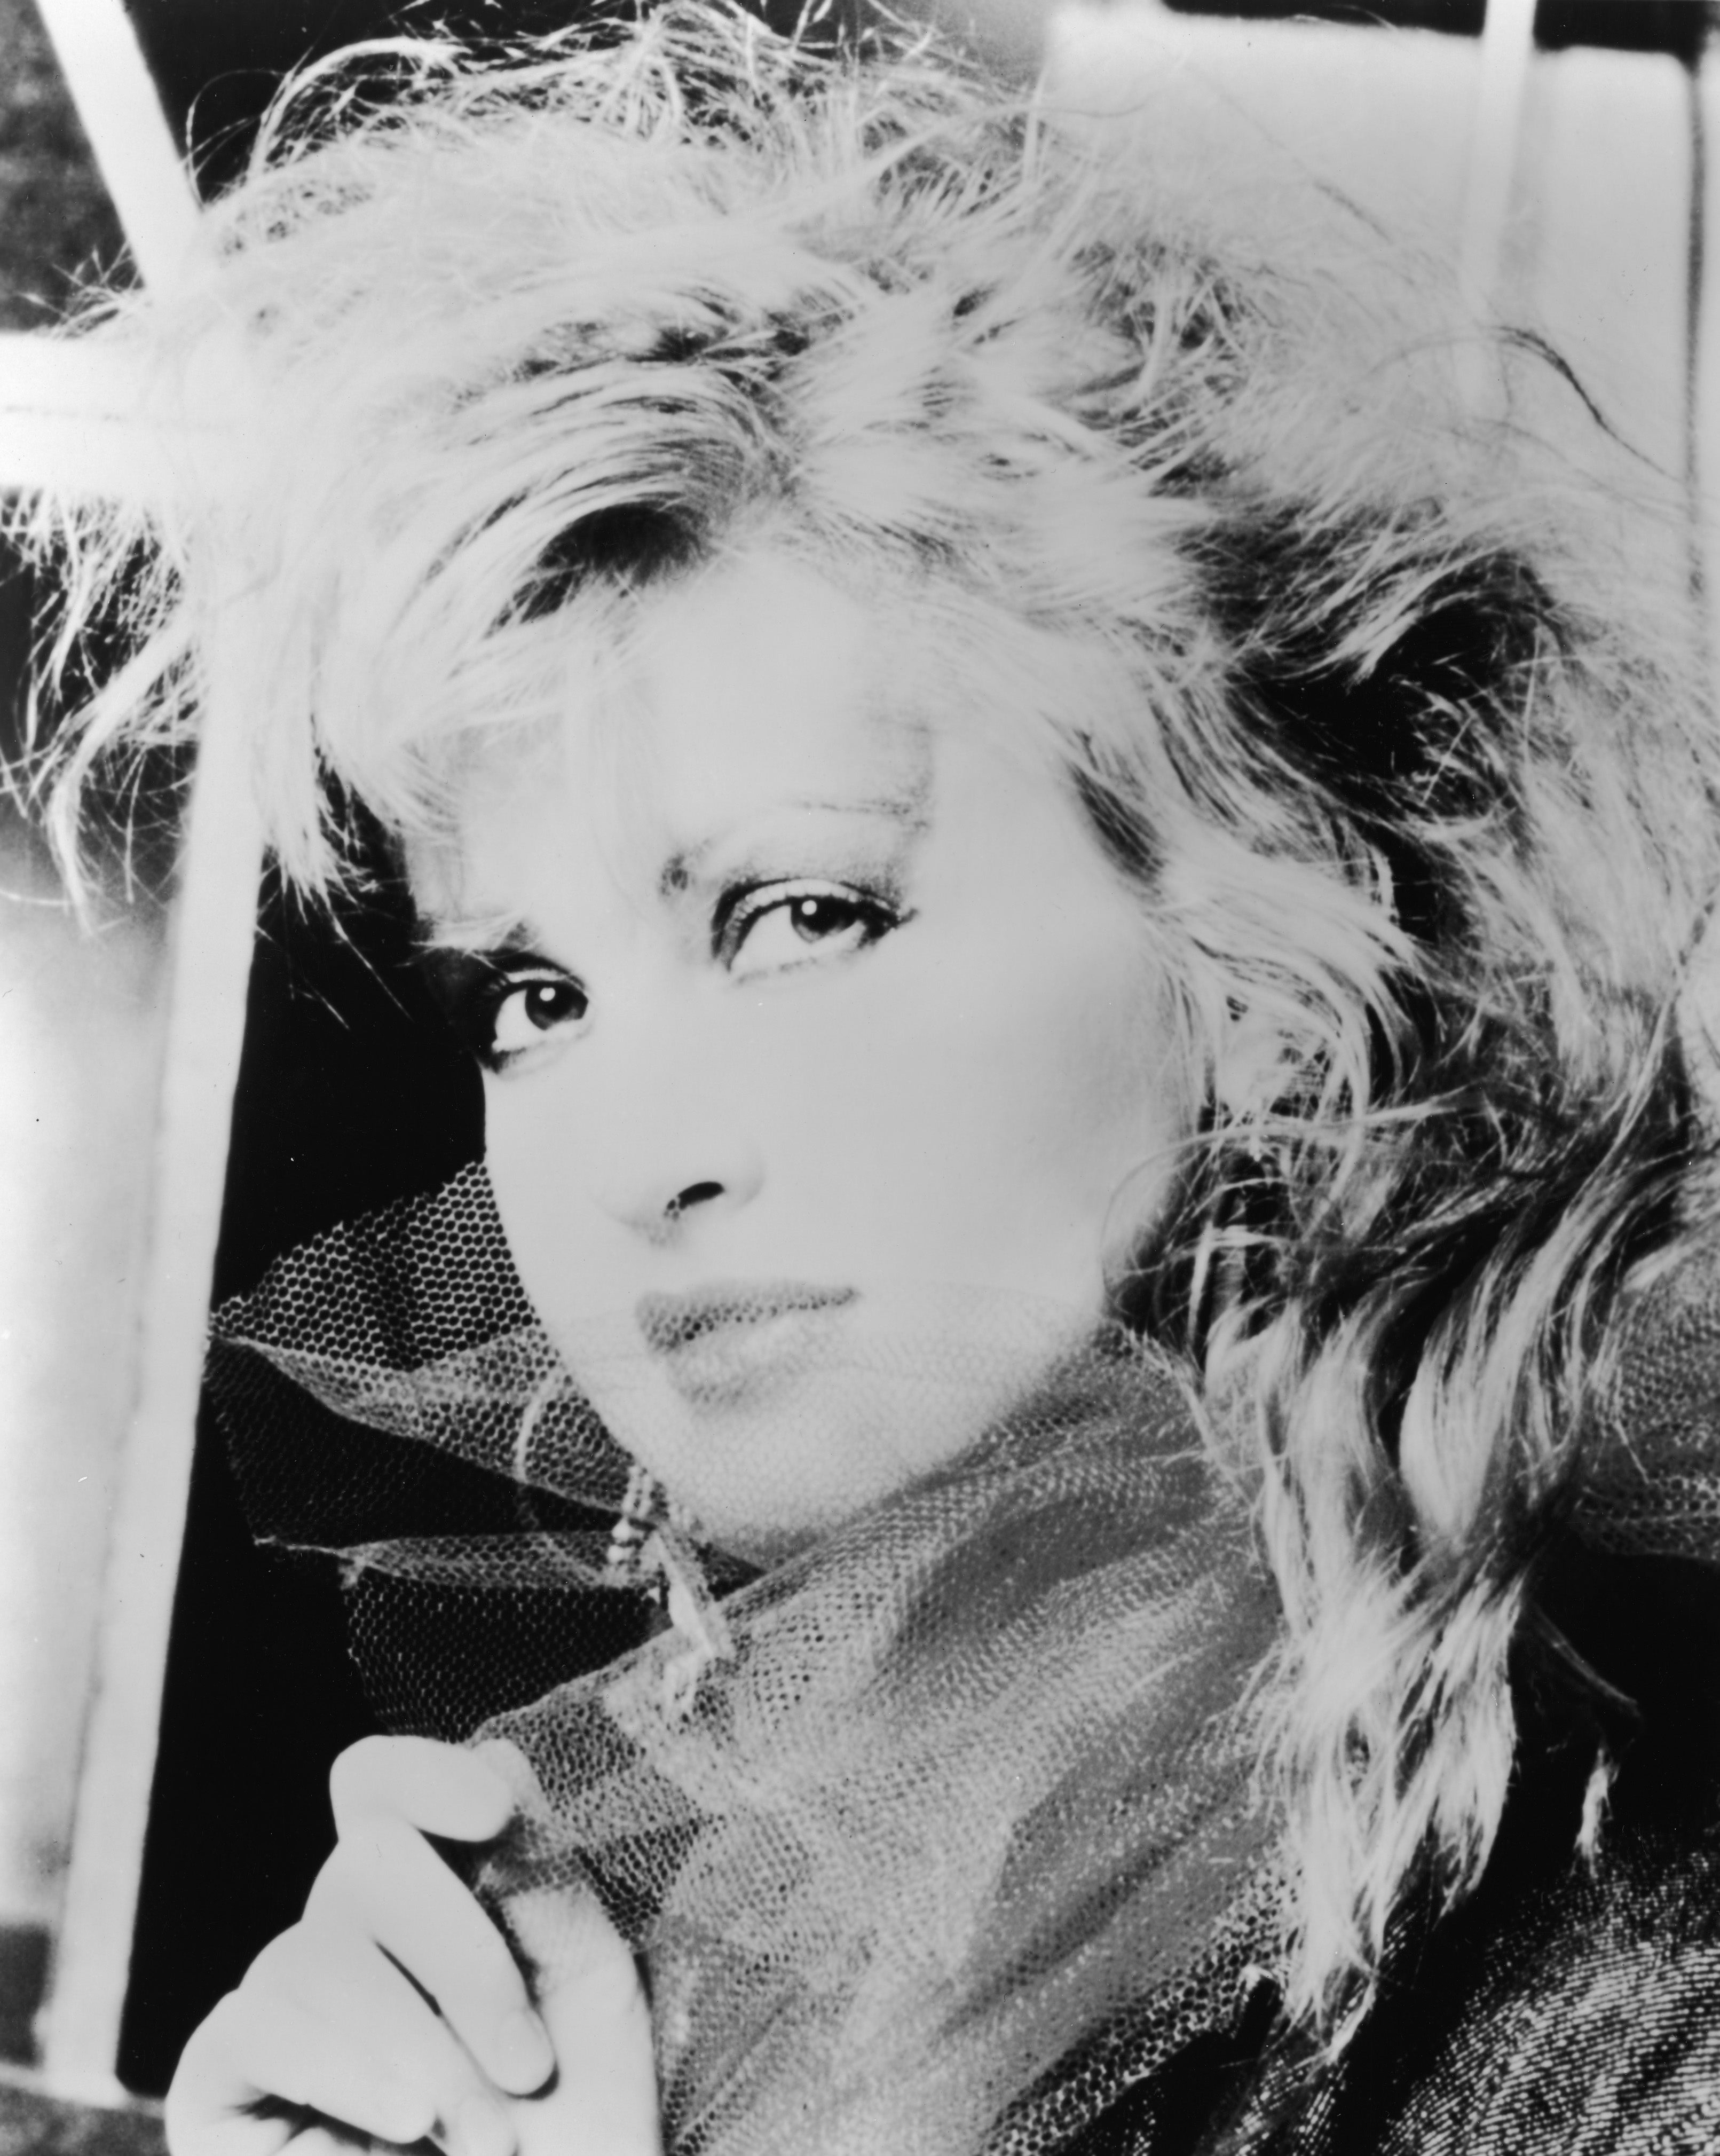 Cyndi Lauper didn't think Madonna liked her in the '80s, despite their exaggerated feud.